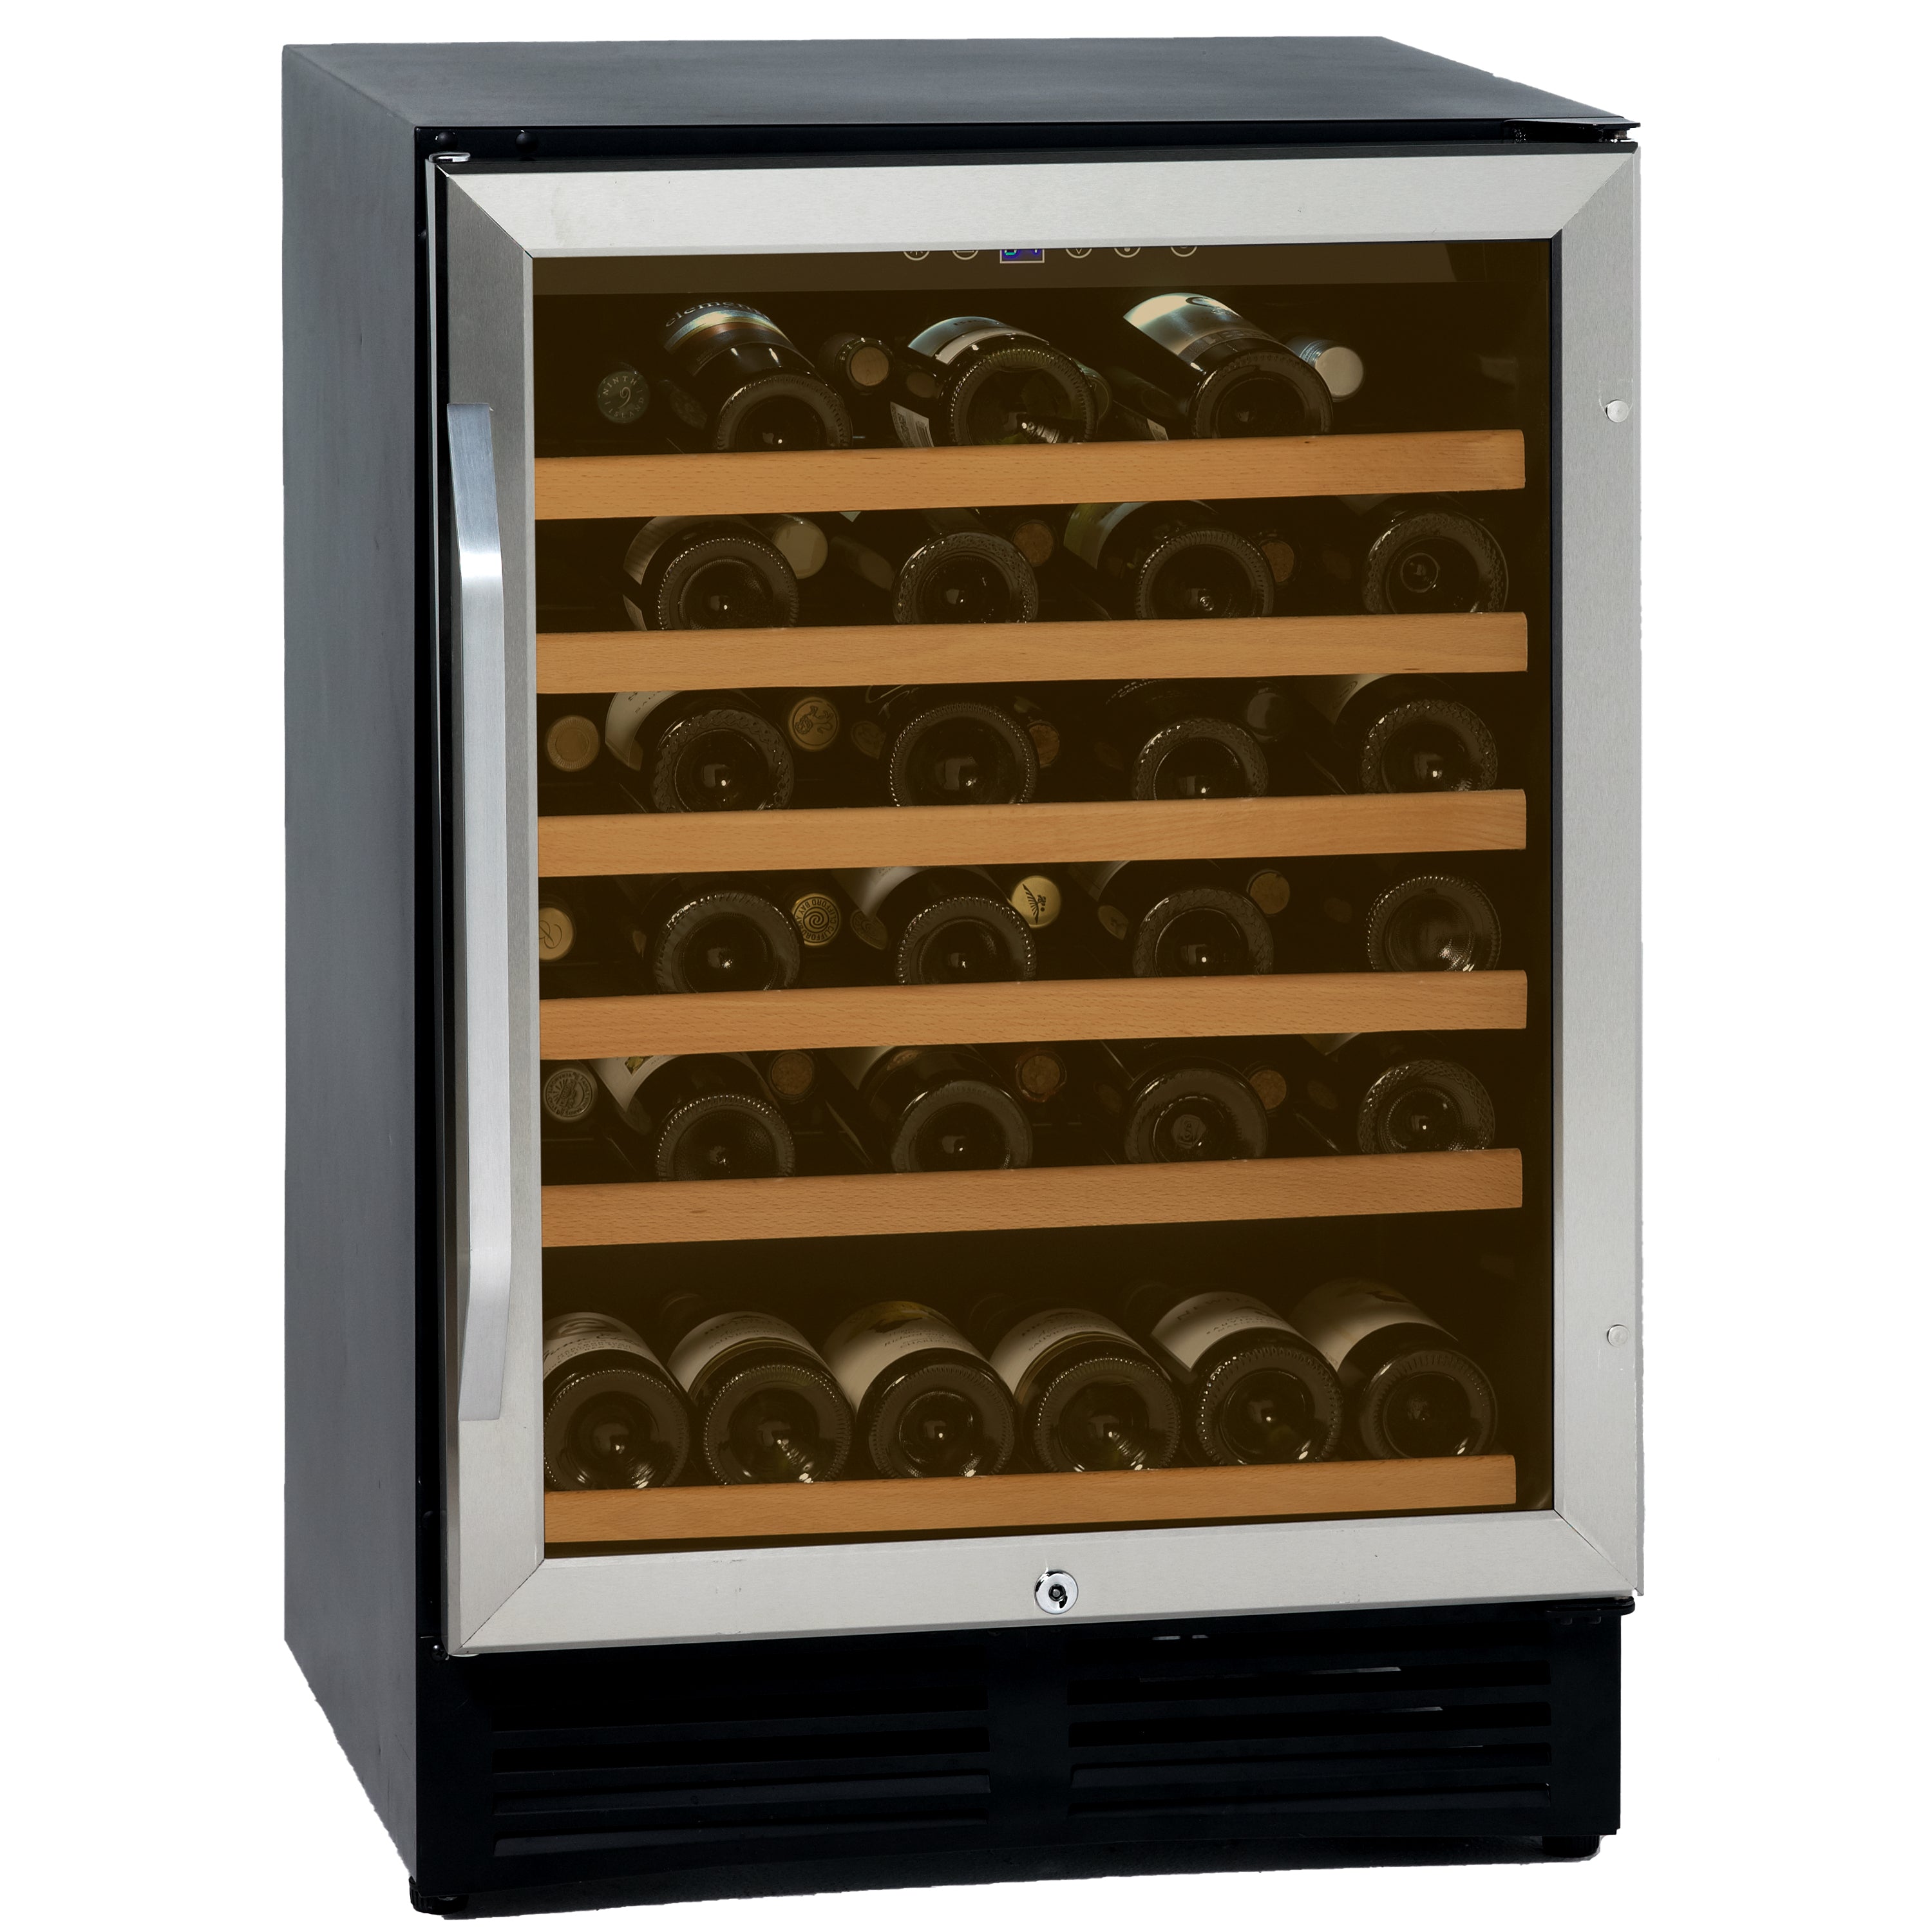 Avanti - WCR506SS, Avanti Wine Cooler, 50 Bottle Capacity, in Stainless Steel with Wood Accent Shelving